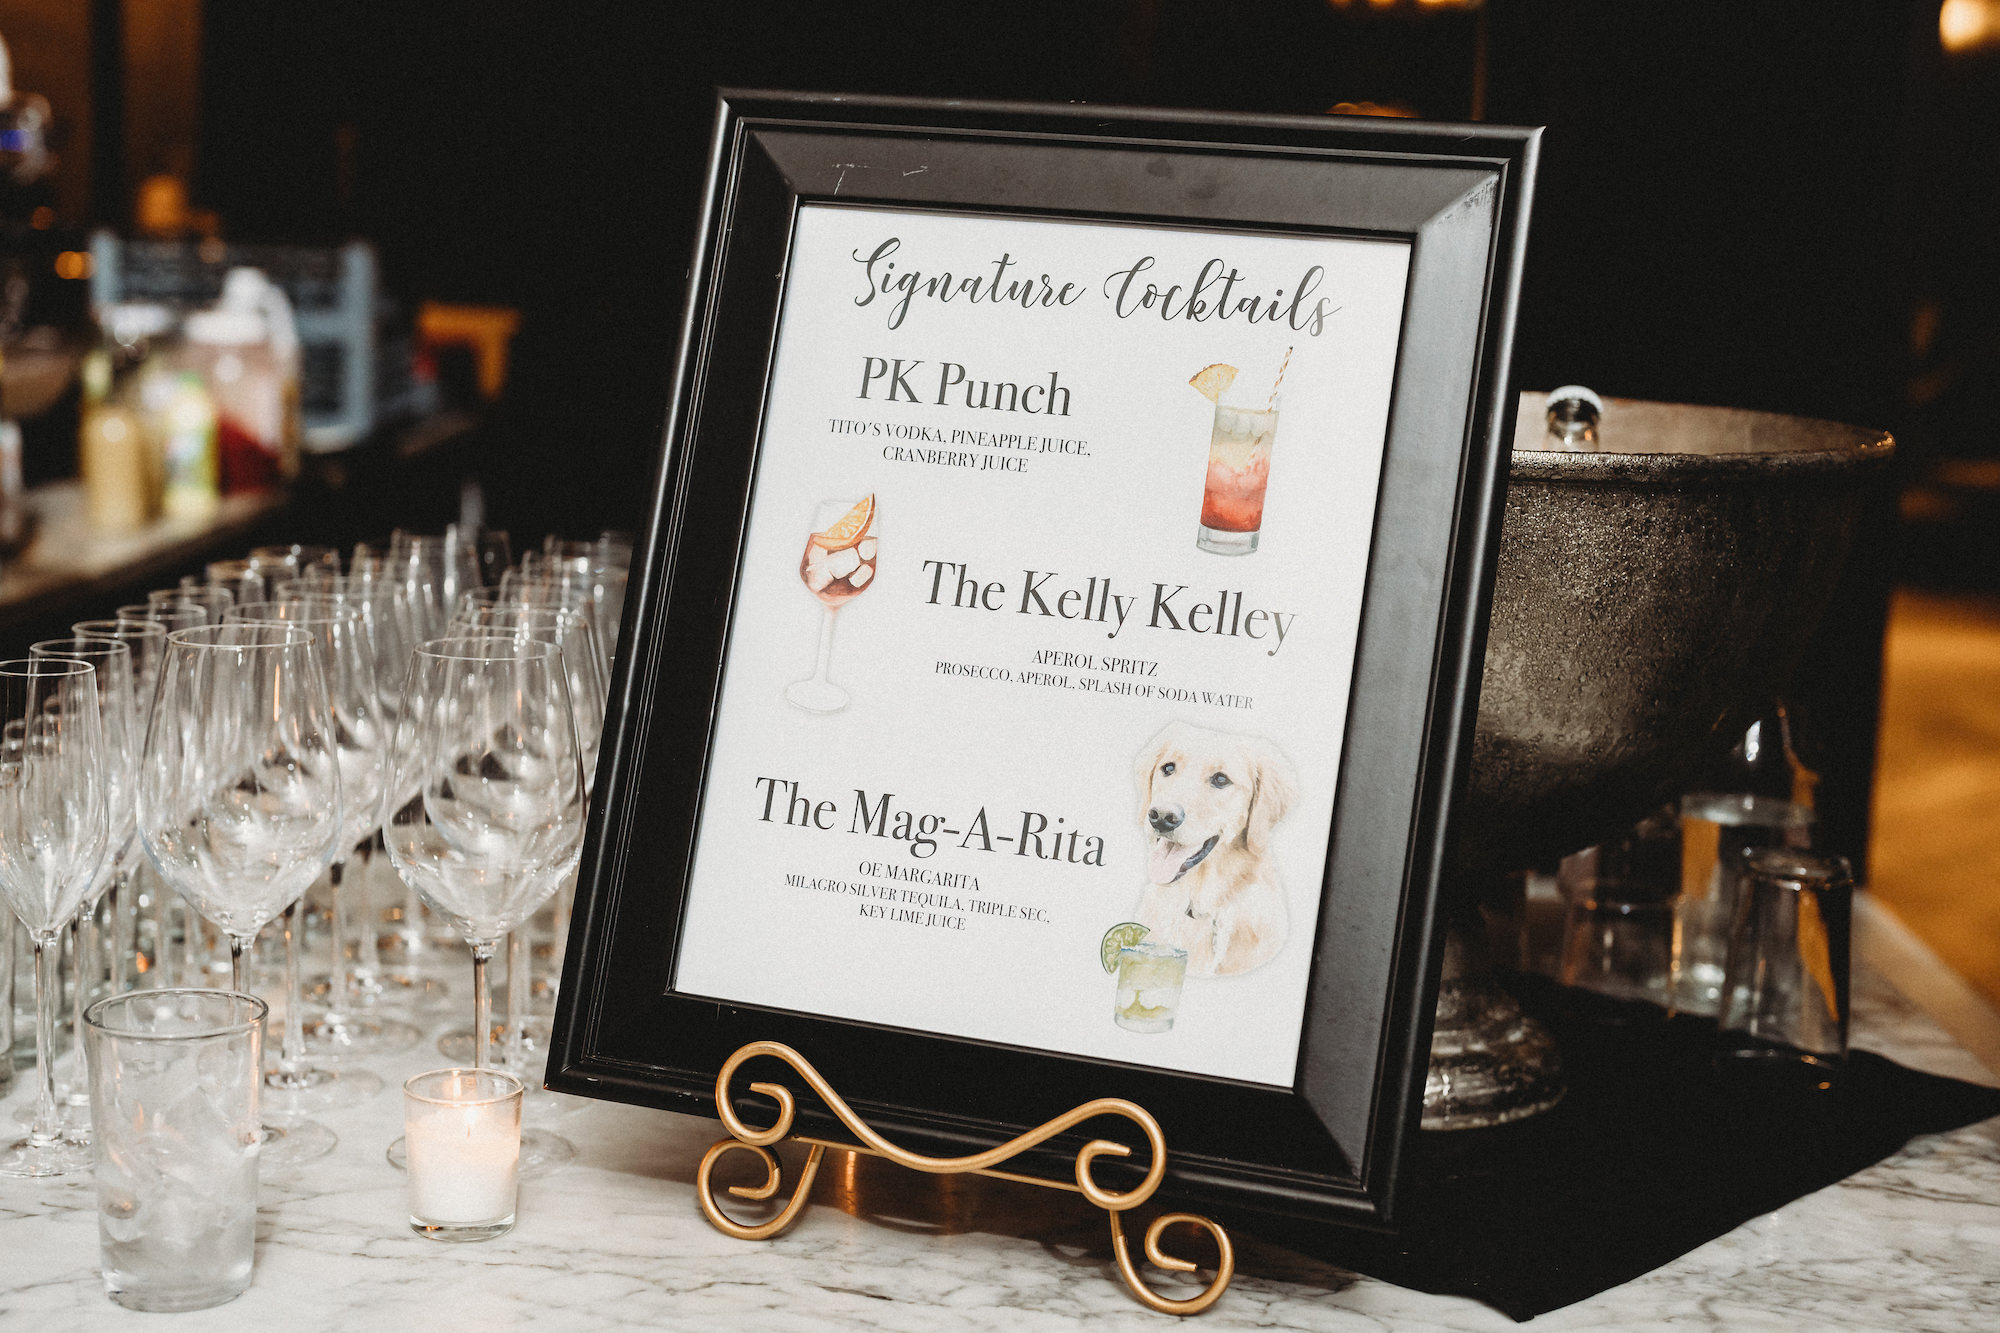 Hand Painted Signature Cocktails Signage with Dog Ideas